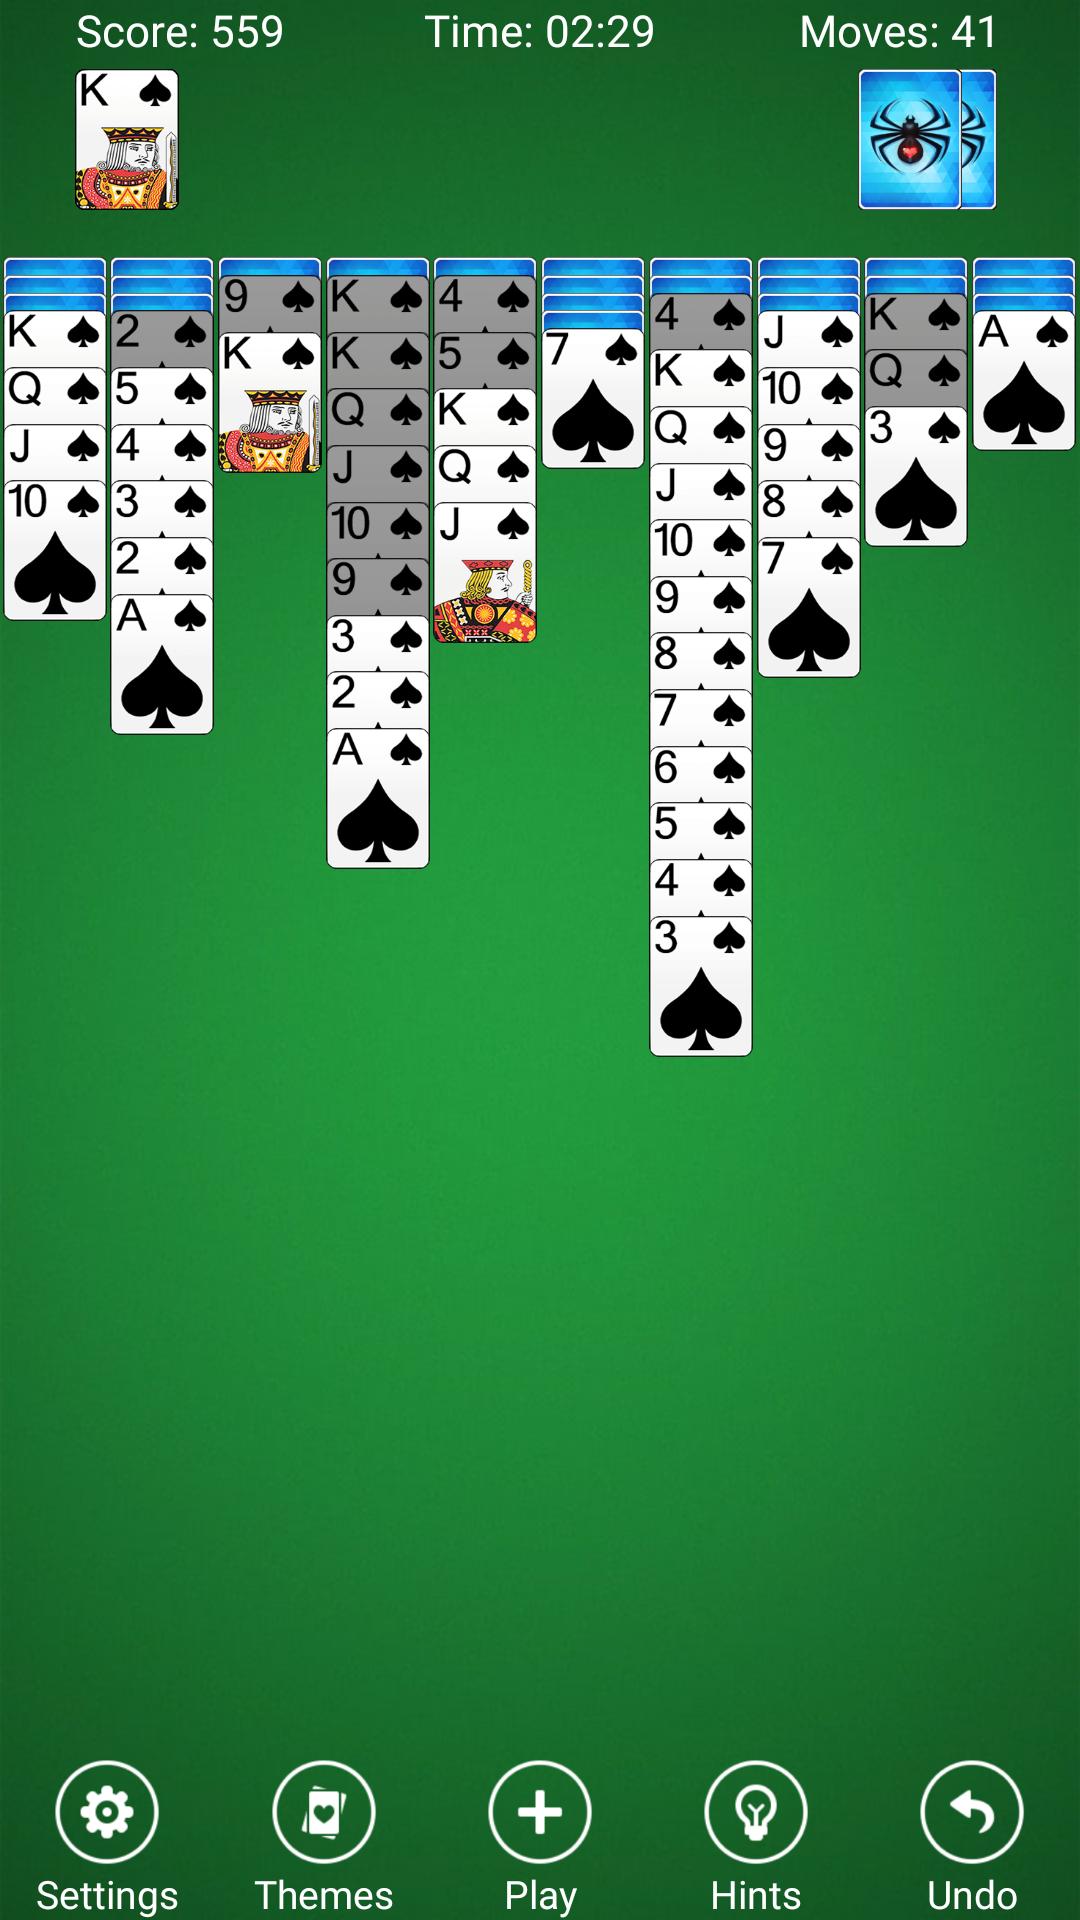 Spider Solitaire for Android - APK Download